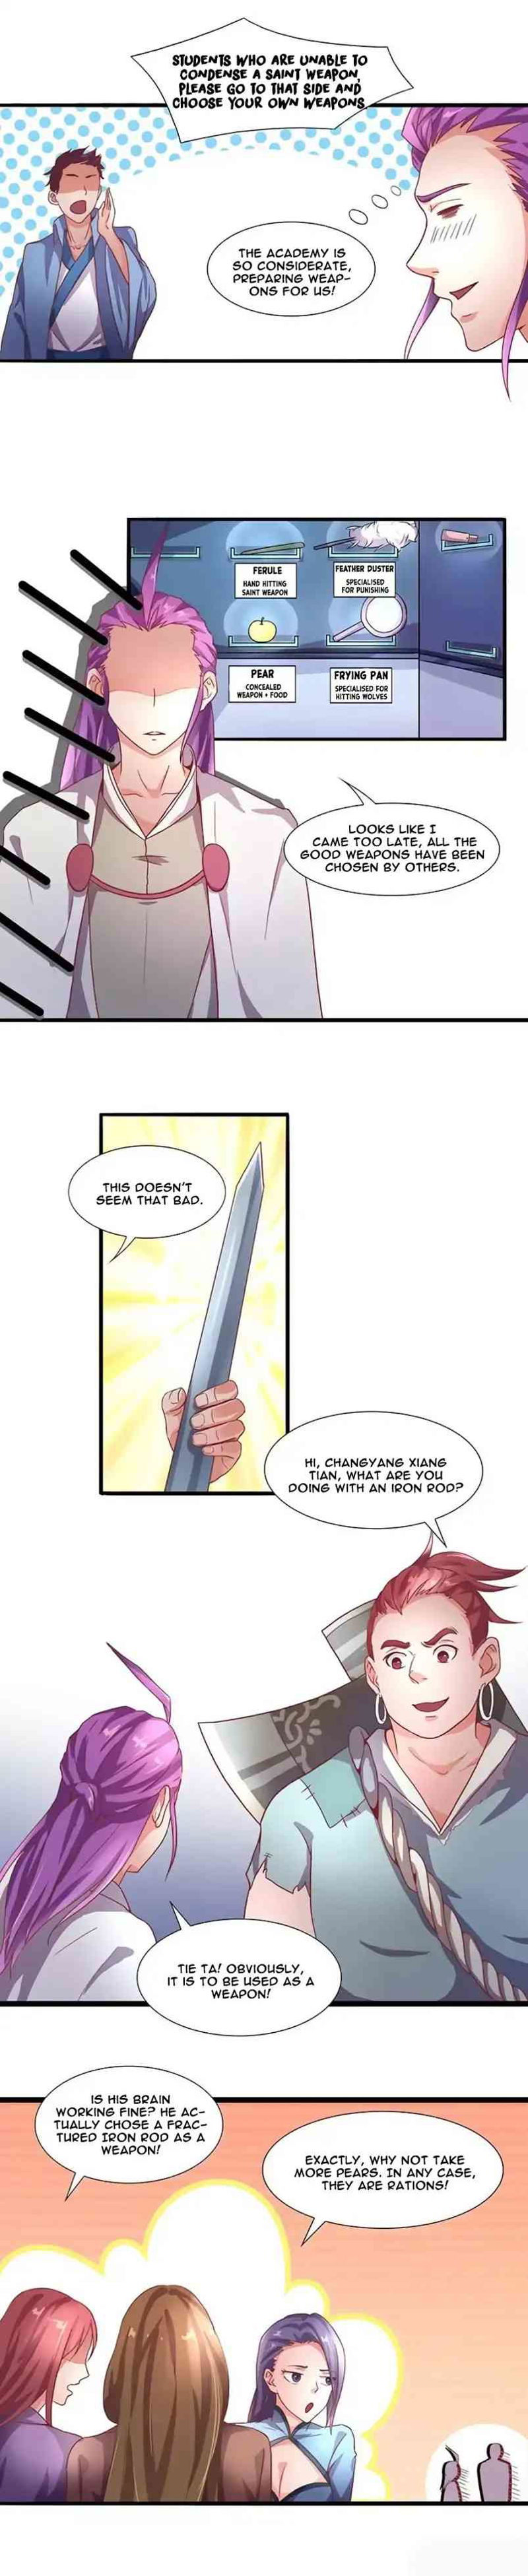 Chaotic Sword God Chapter 11 page 3